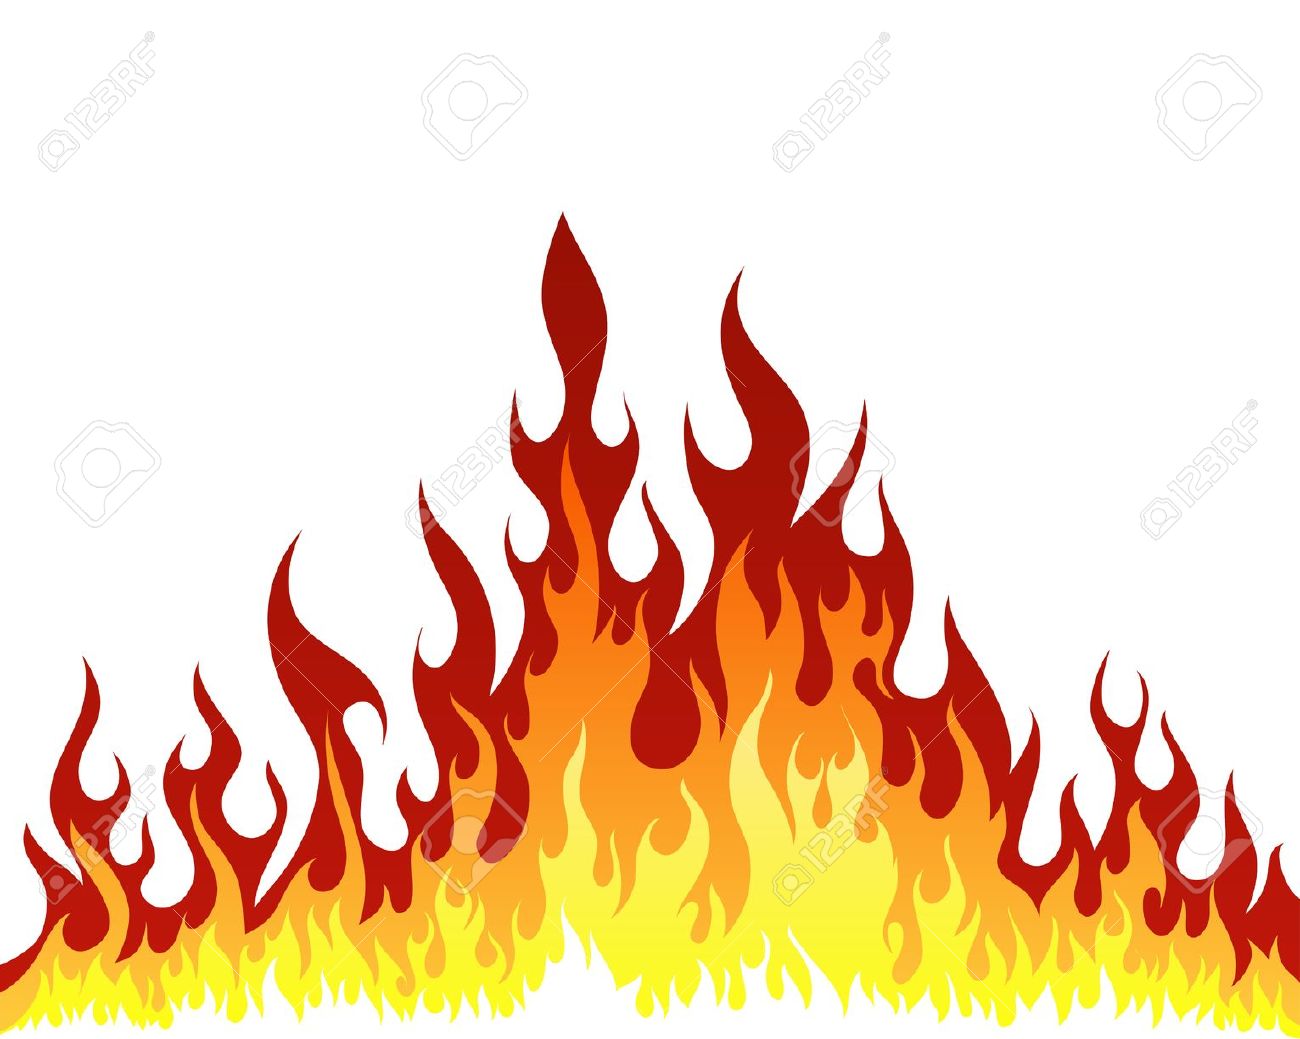 Flames clip art free free clipart images